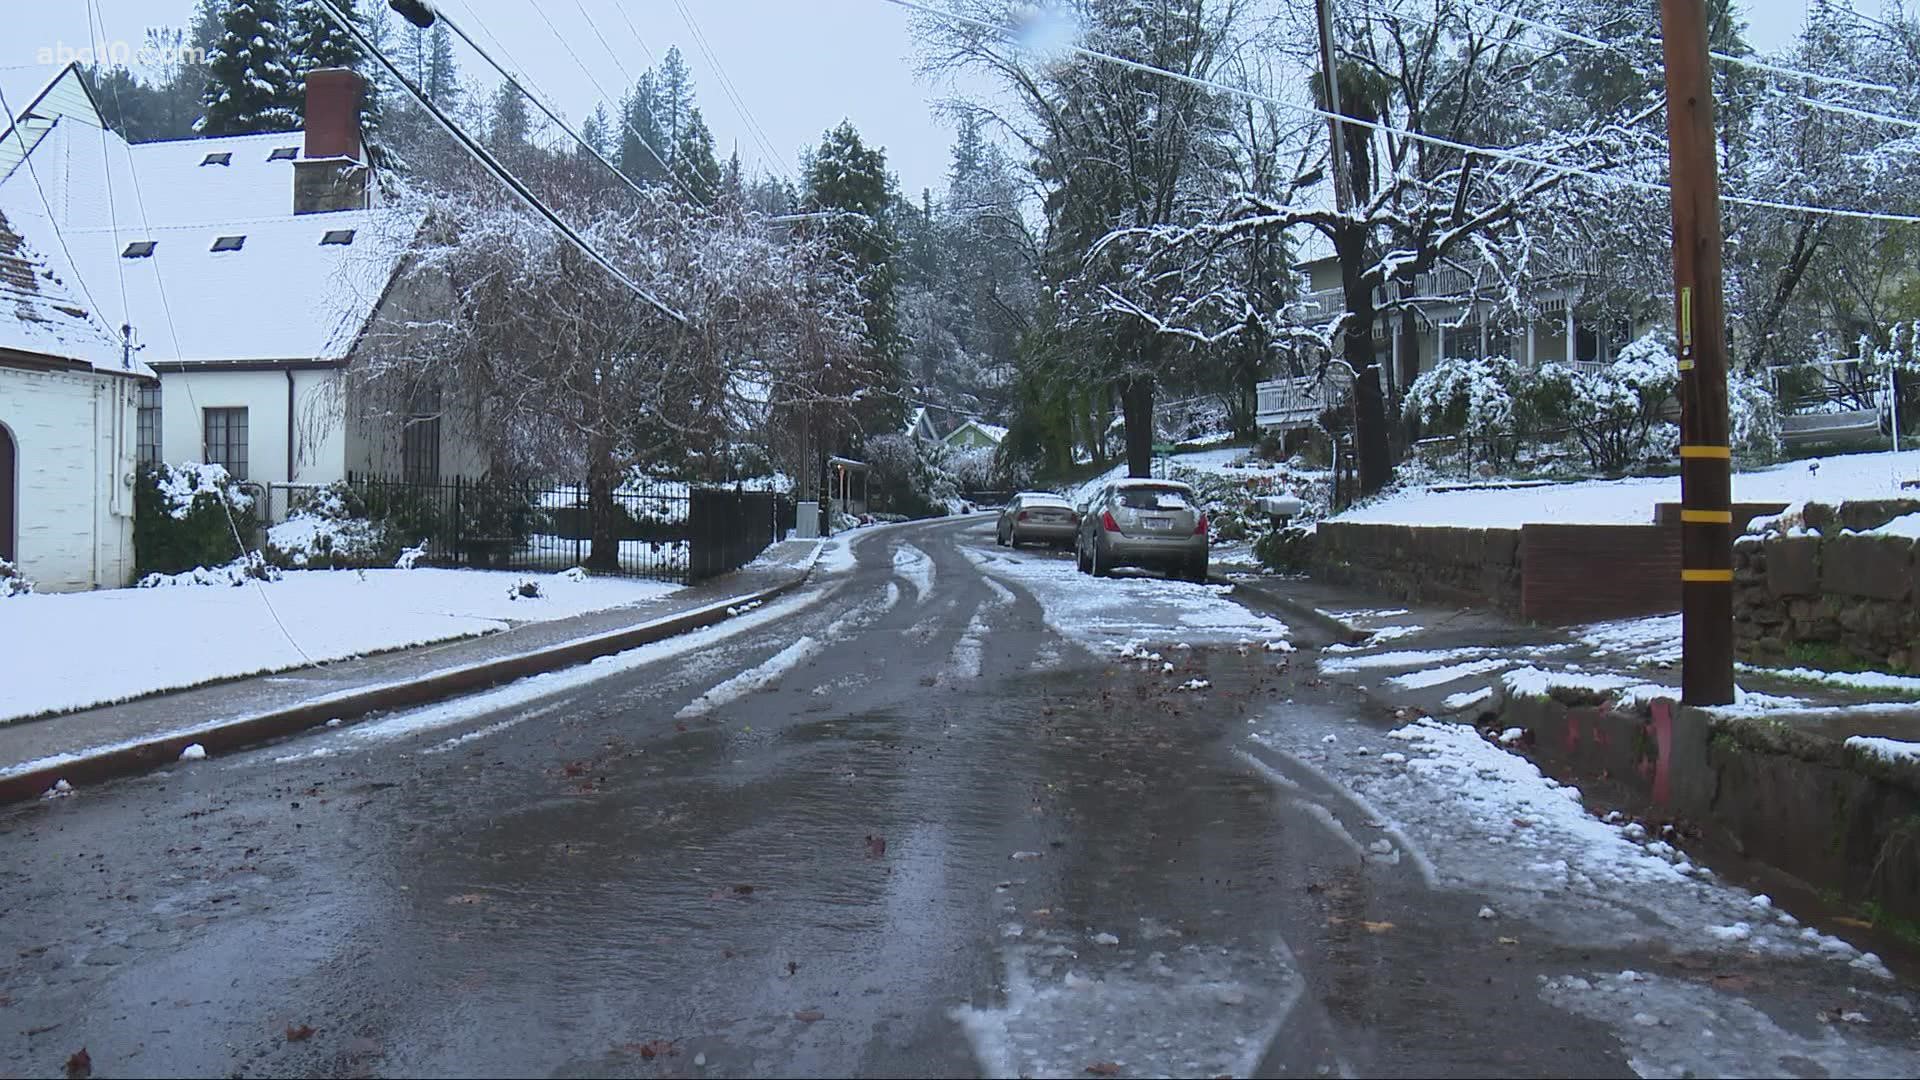 Mike Duffy was in Placer County where PG&E customers are slowly having their power restored.